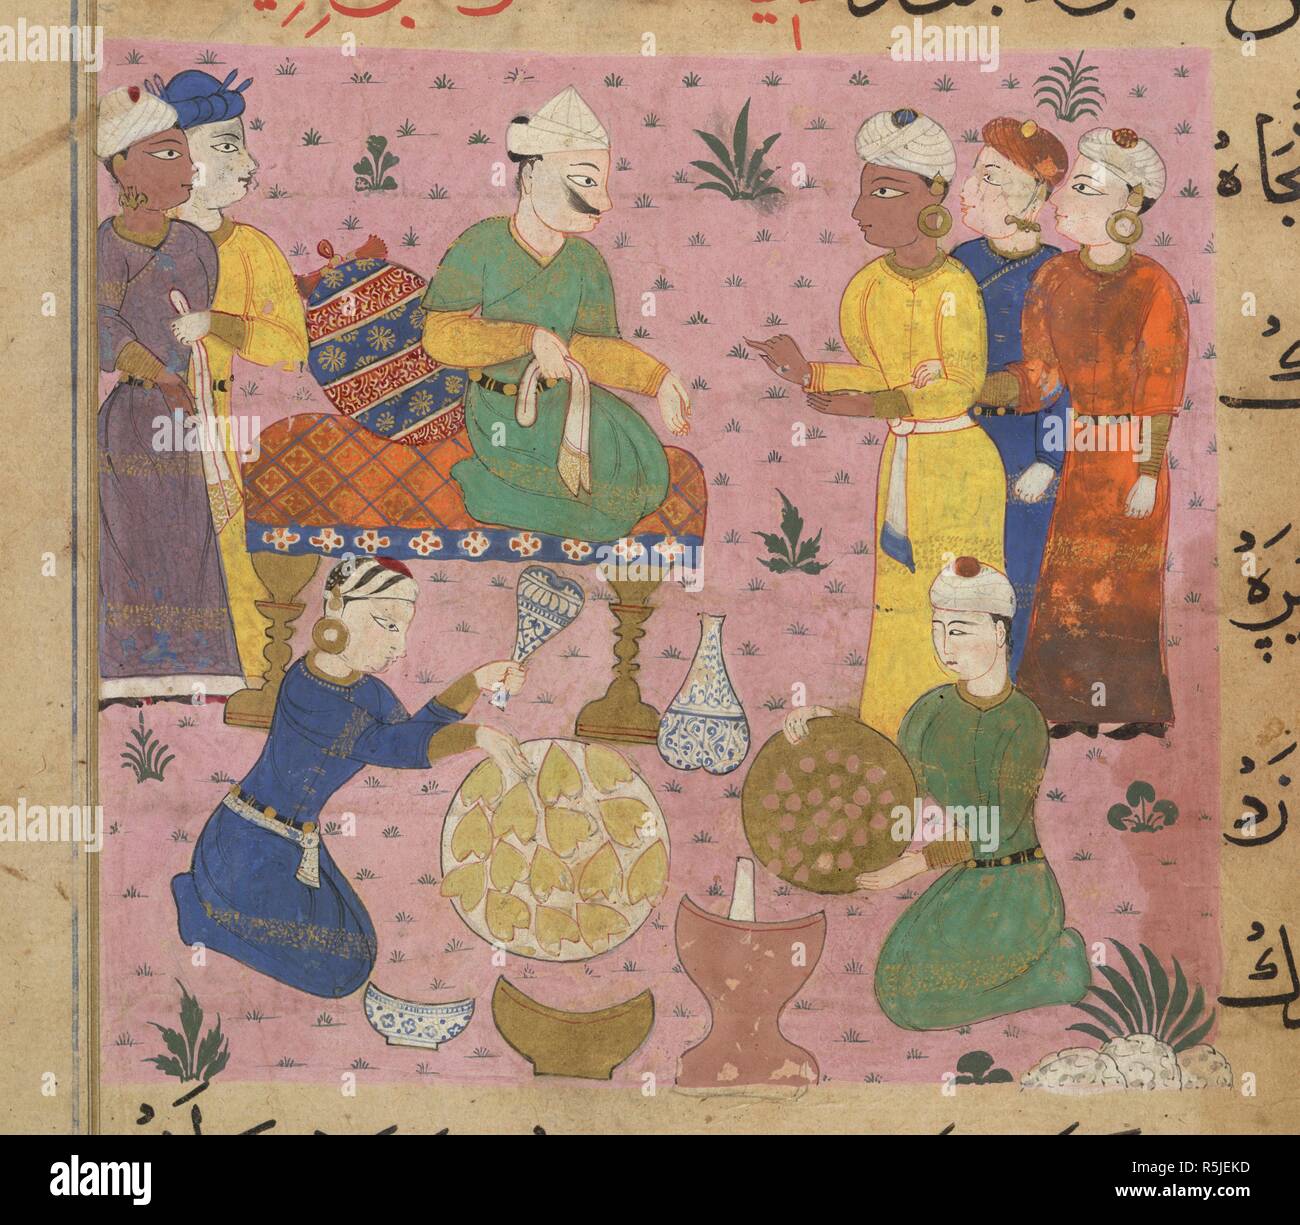 Preparation of betel chews. The Ni'matnama-i Nasir al-Din Shah. A manuscript o. 1495 - 1505. Preparation of betel chews for the Sultan Ghiyath al-Din. Opaque watercolour. Sultanate style.  Image taken from The Ni'matnama-i Nasir al-Din Shah. A manuscript on Indian cookery and the preparation of sweetmeats, spices etc.  Originally published/produced in 1495 - 1505. . Source: I.O. ISLAMIC 149, f.94. Language: Persian. Stock Photo